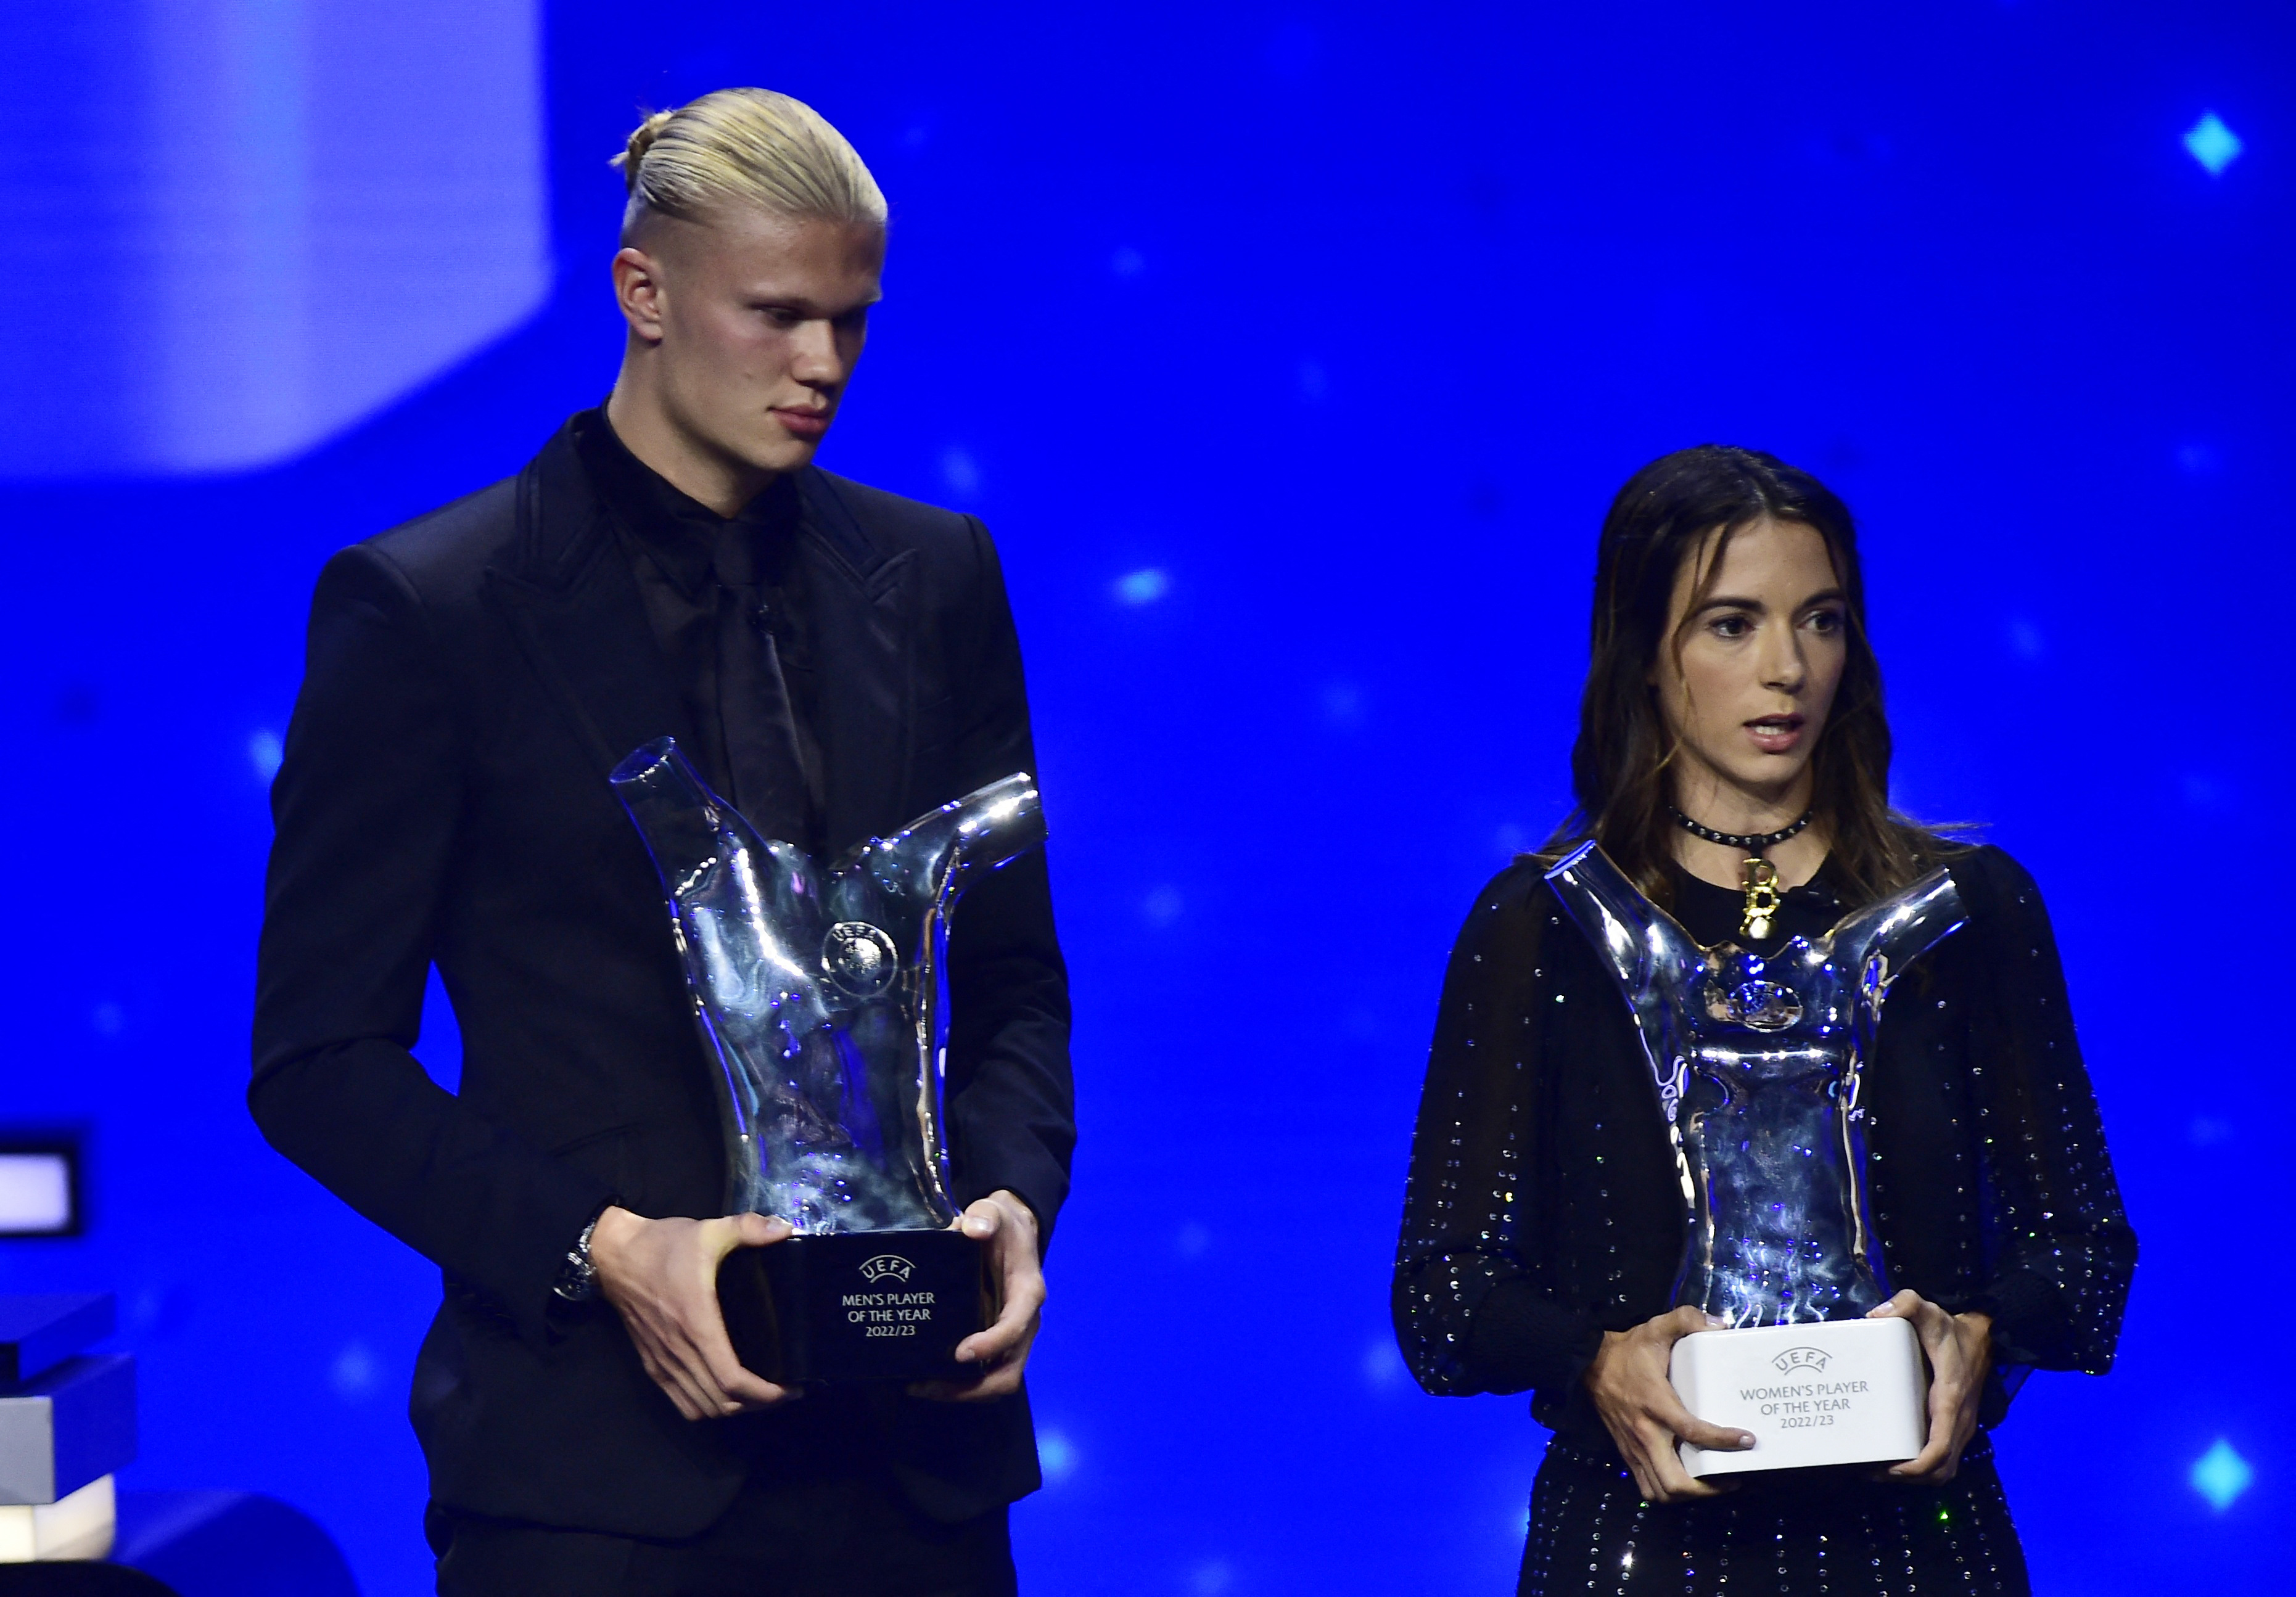 Holland won the European Player of the Year award